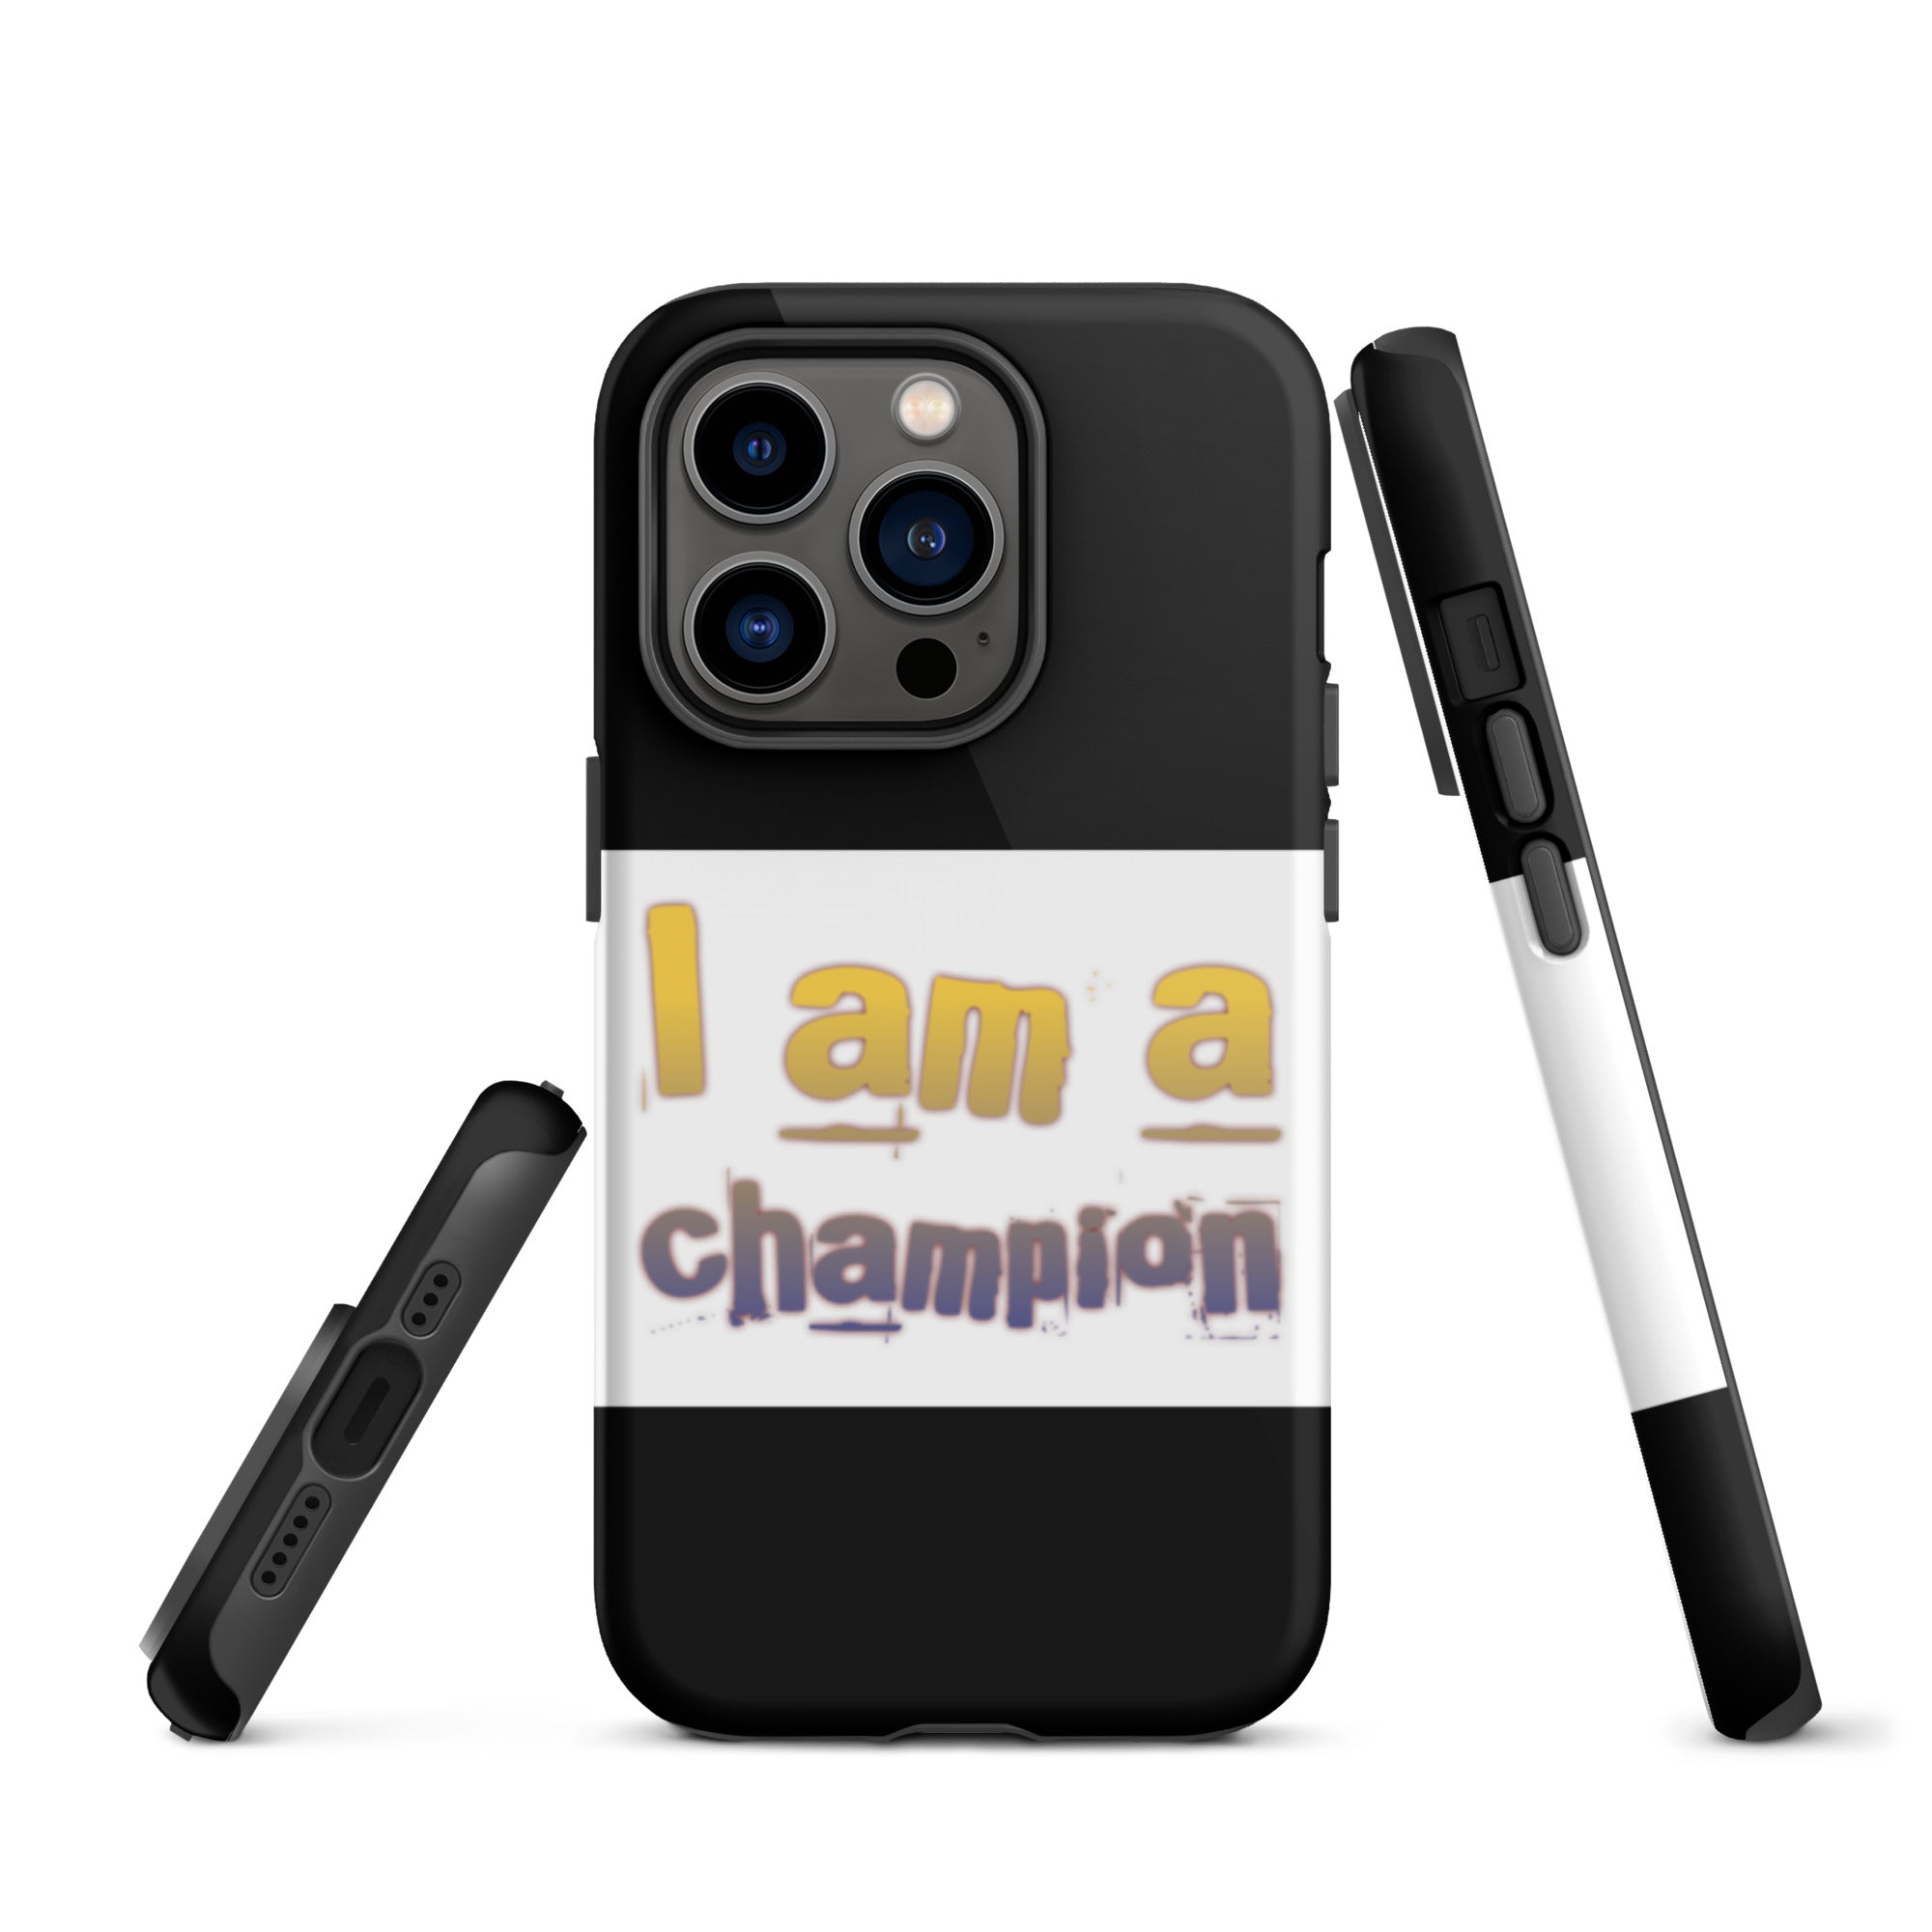 GloWell Designs - Tough iPhone Case - Affirmation Quote - I Am a Champion